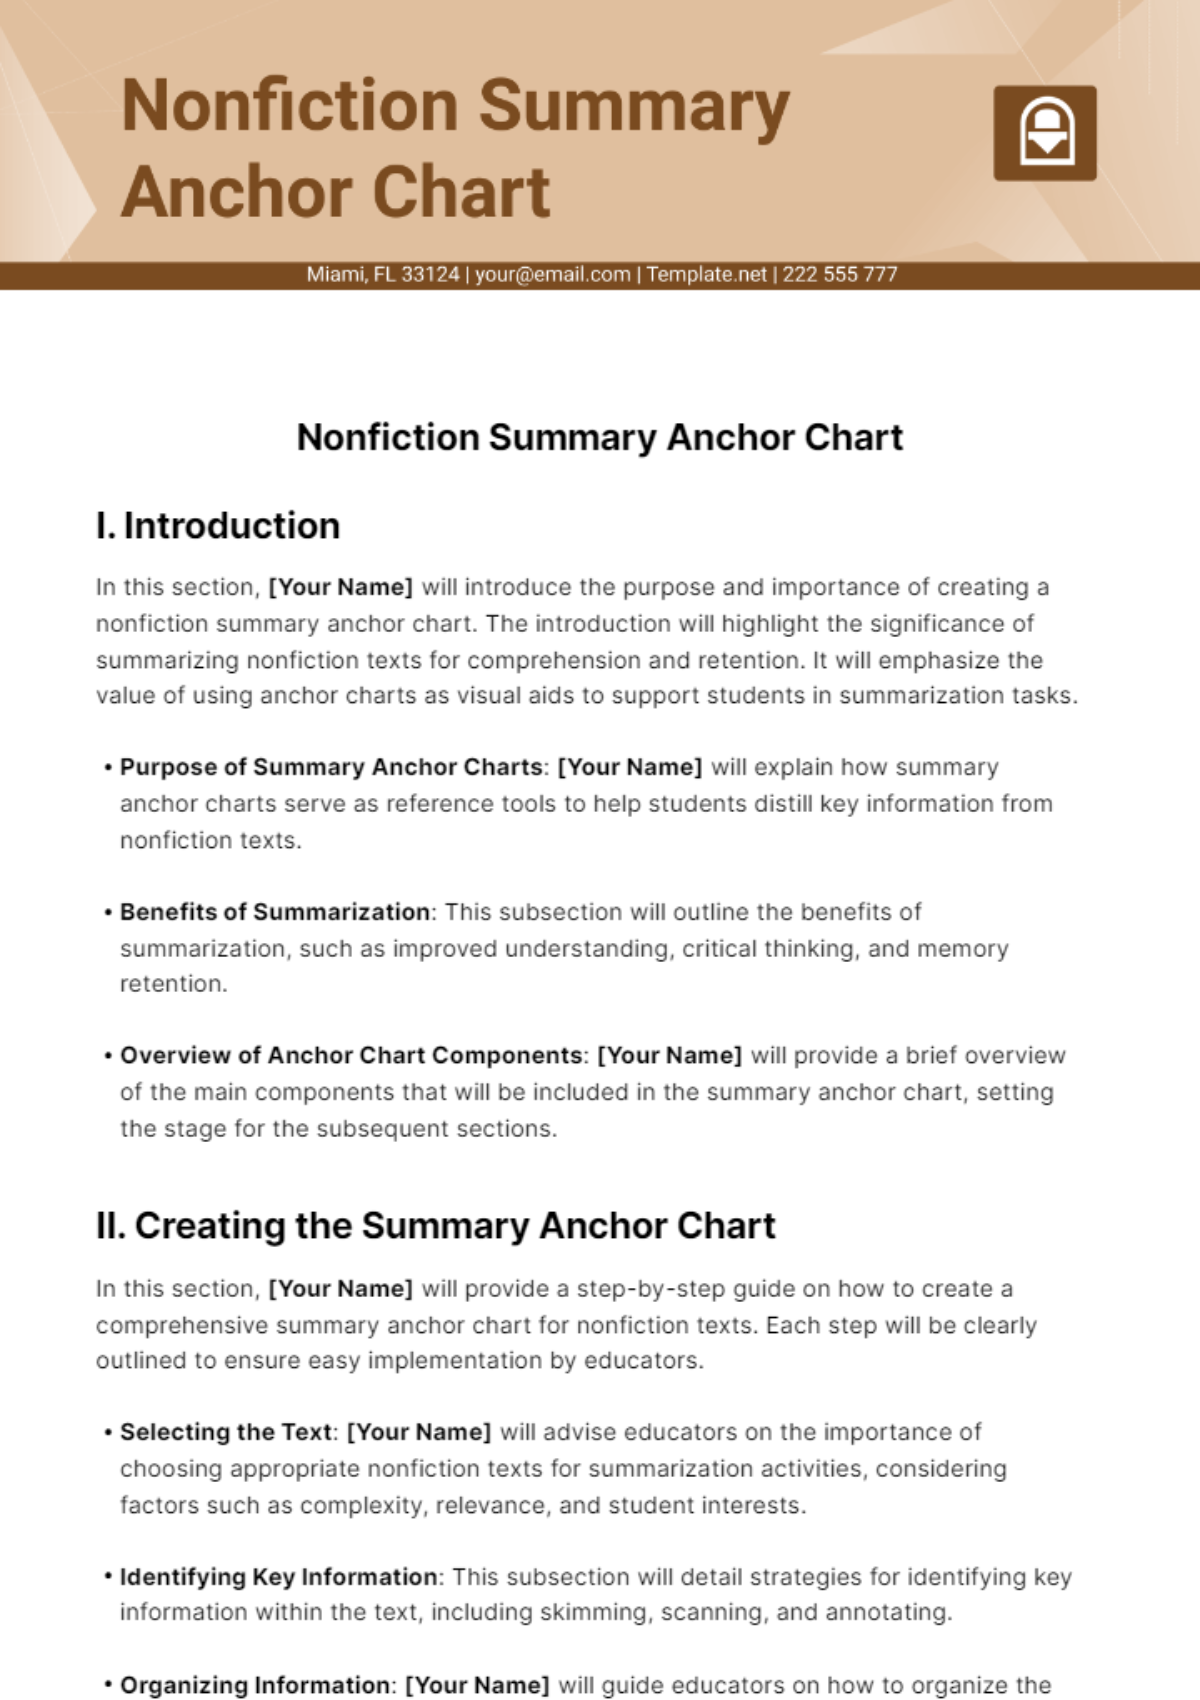 Nonfiction Summary Anchor Chart Template